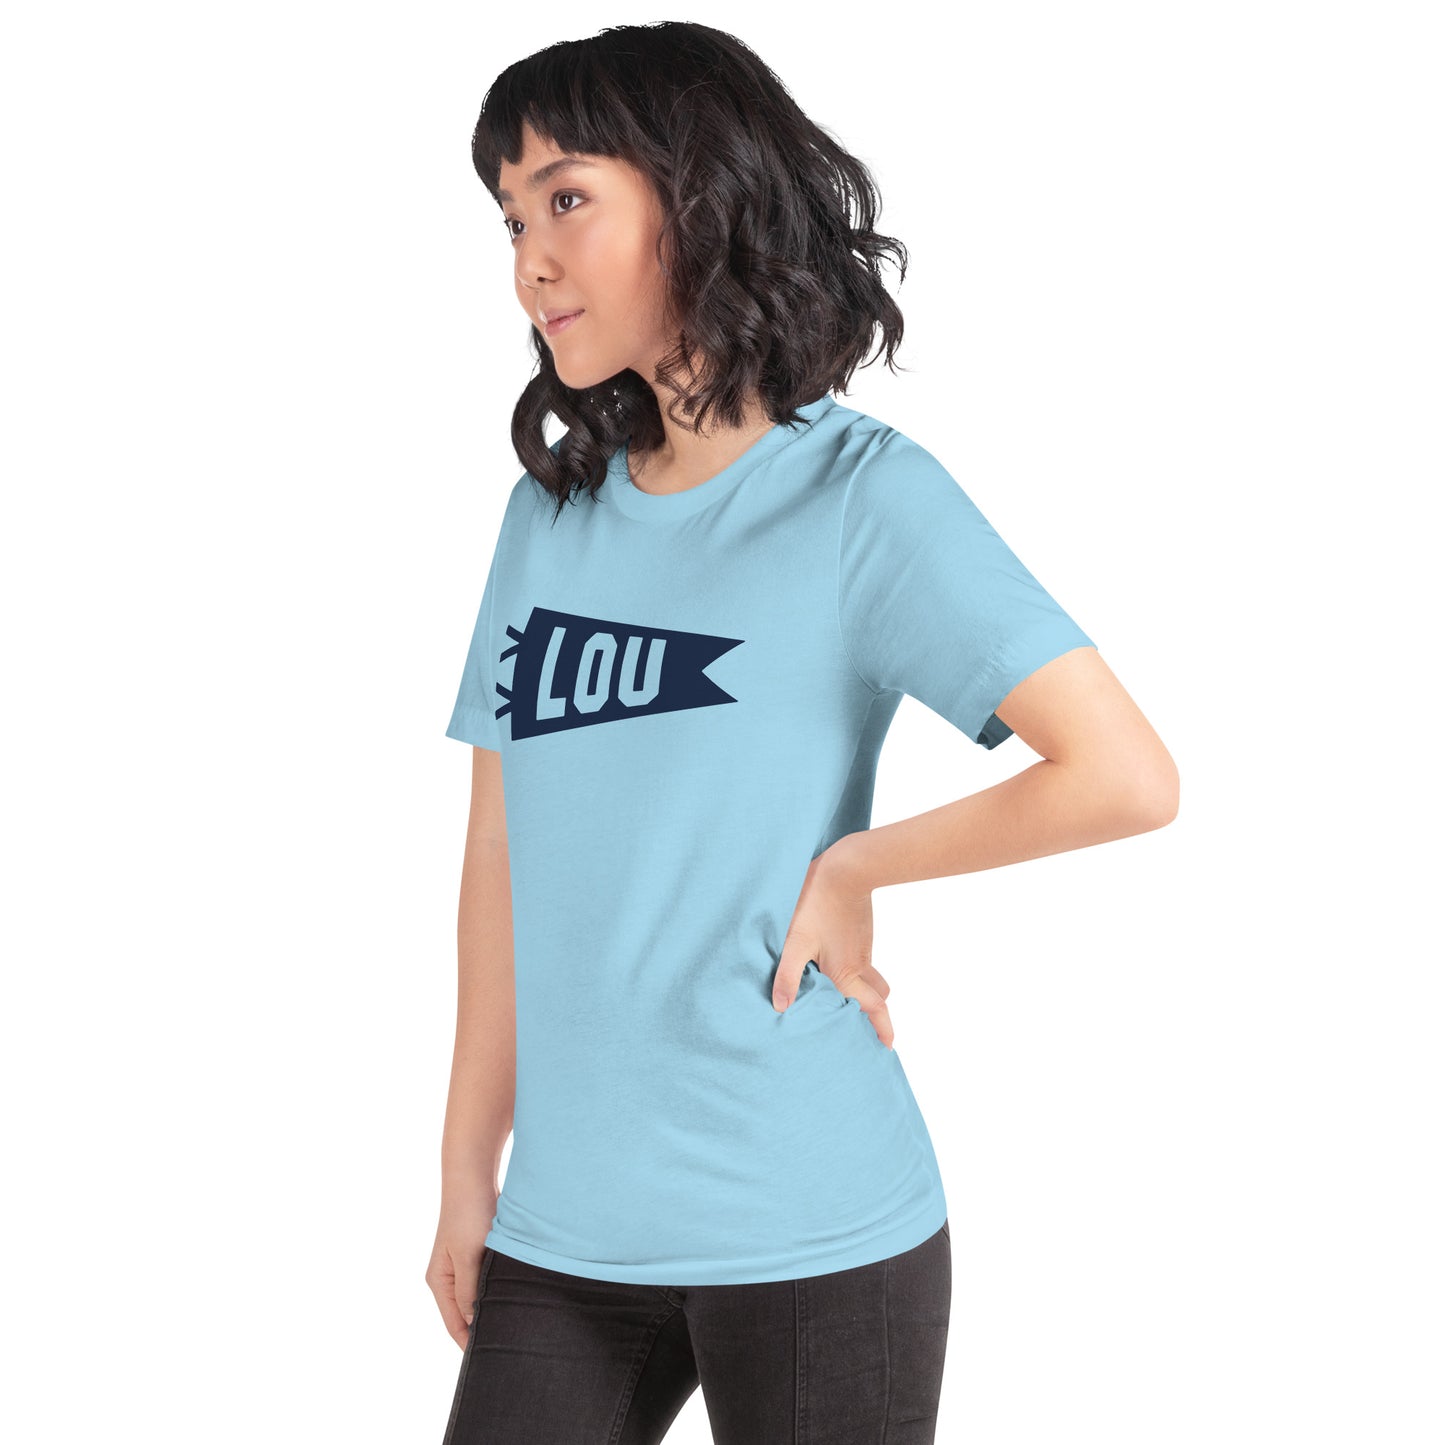 Airport Code T-Shirt - Navy Blue Graphic • LOU Louisville • YHM Designs - Image 08